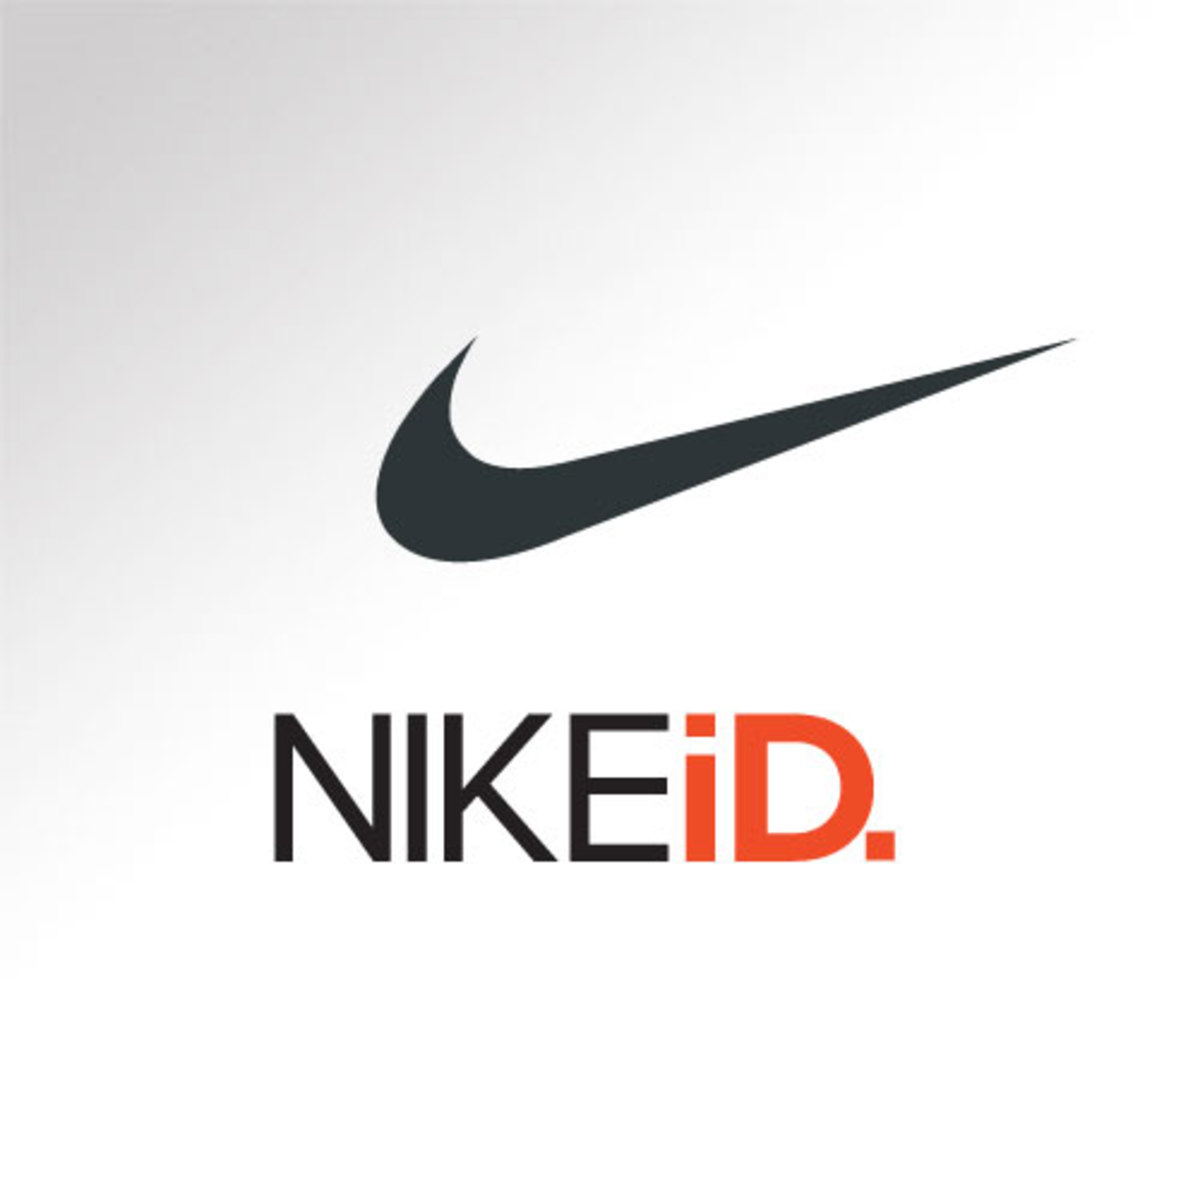 NikeiD: One Can Hope